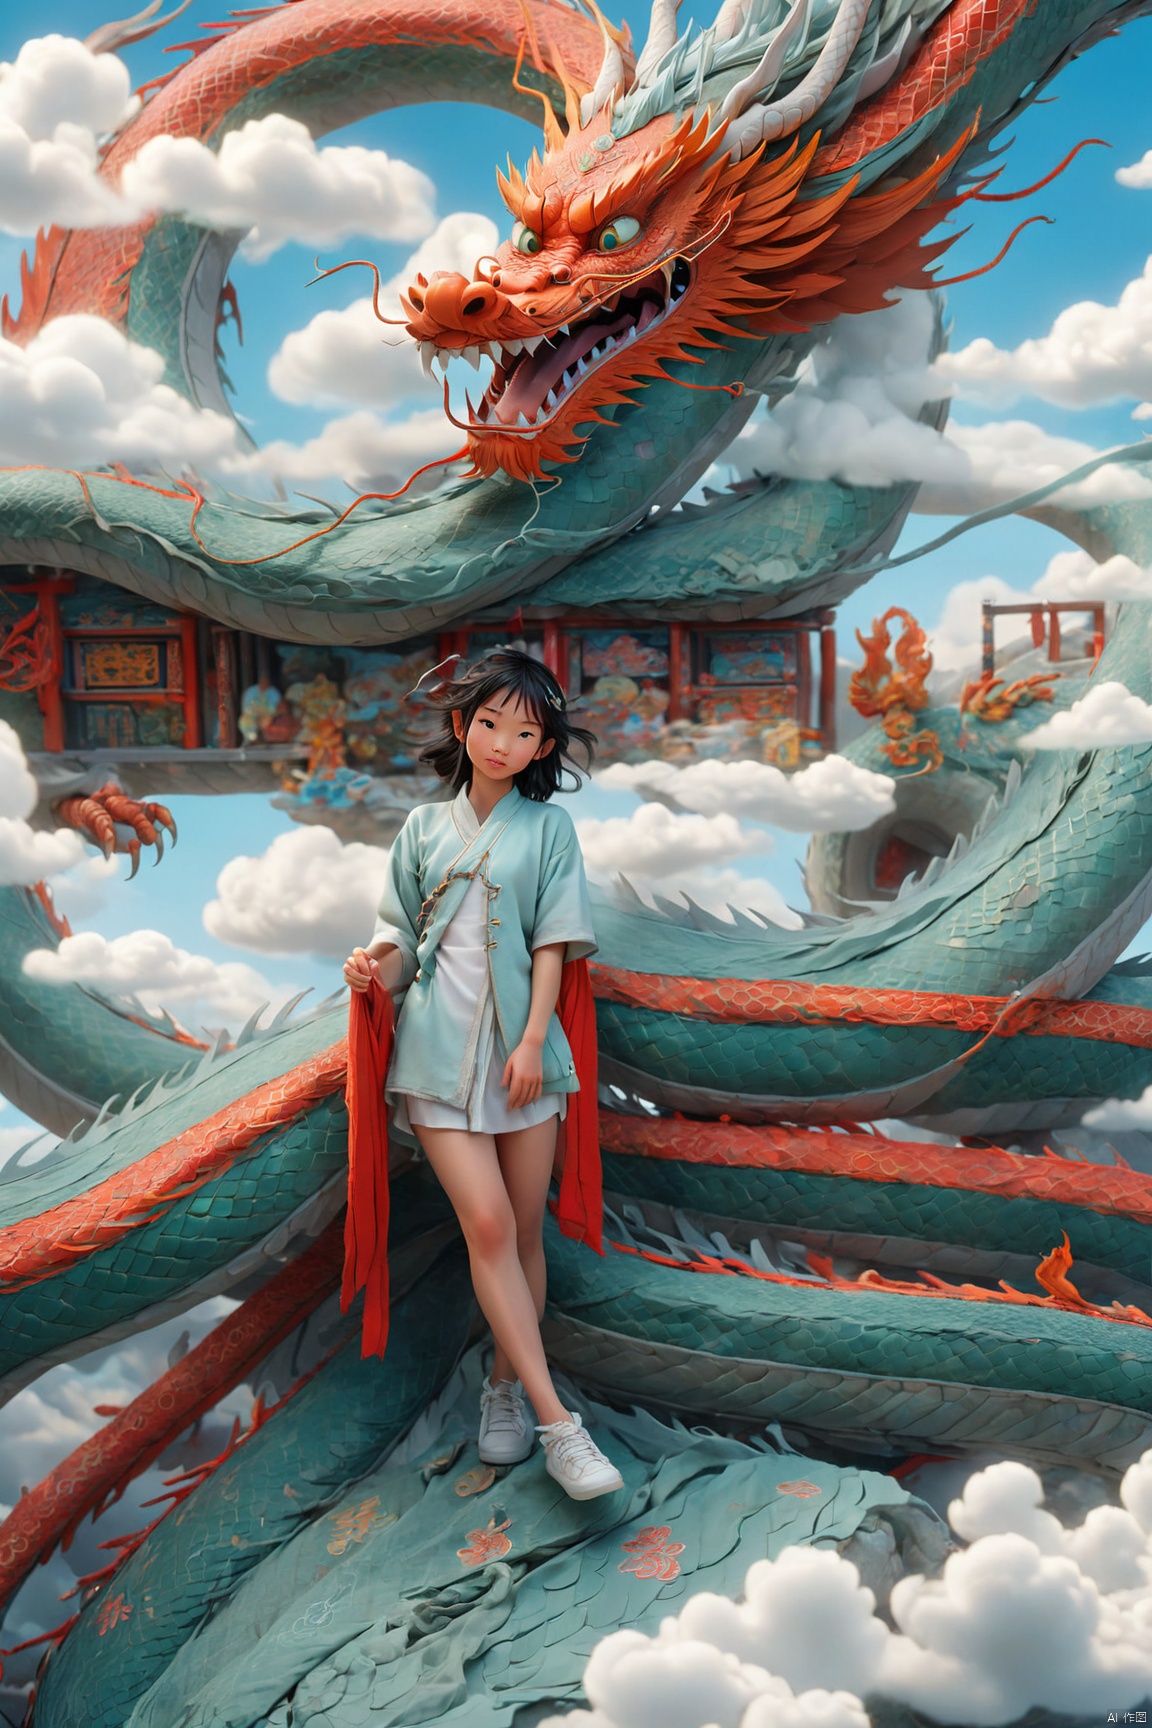  A girl wearing thin gauze,in a light and flowing outfit intertwined with a dragon,Create a distinct 3D visualization of a miniature Chinese dragon,full of characters and characters,lively in a transitional setting The backlog should be brief,having a clear blue sky or soft clouds,to keep the focus on the dragon's reliable design The dragon itself should have feature realistic textures and a lifestyle,engaging expression,captured in a way that showcases its magnetic,mythical nature in a heartbeat,invading Manner, looking at the camera,(pore:1.2),asia,ultimate details,